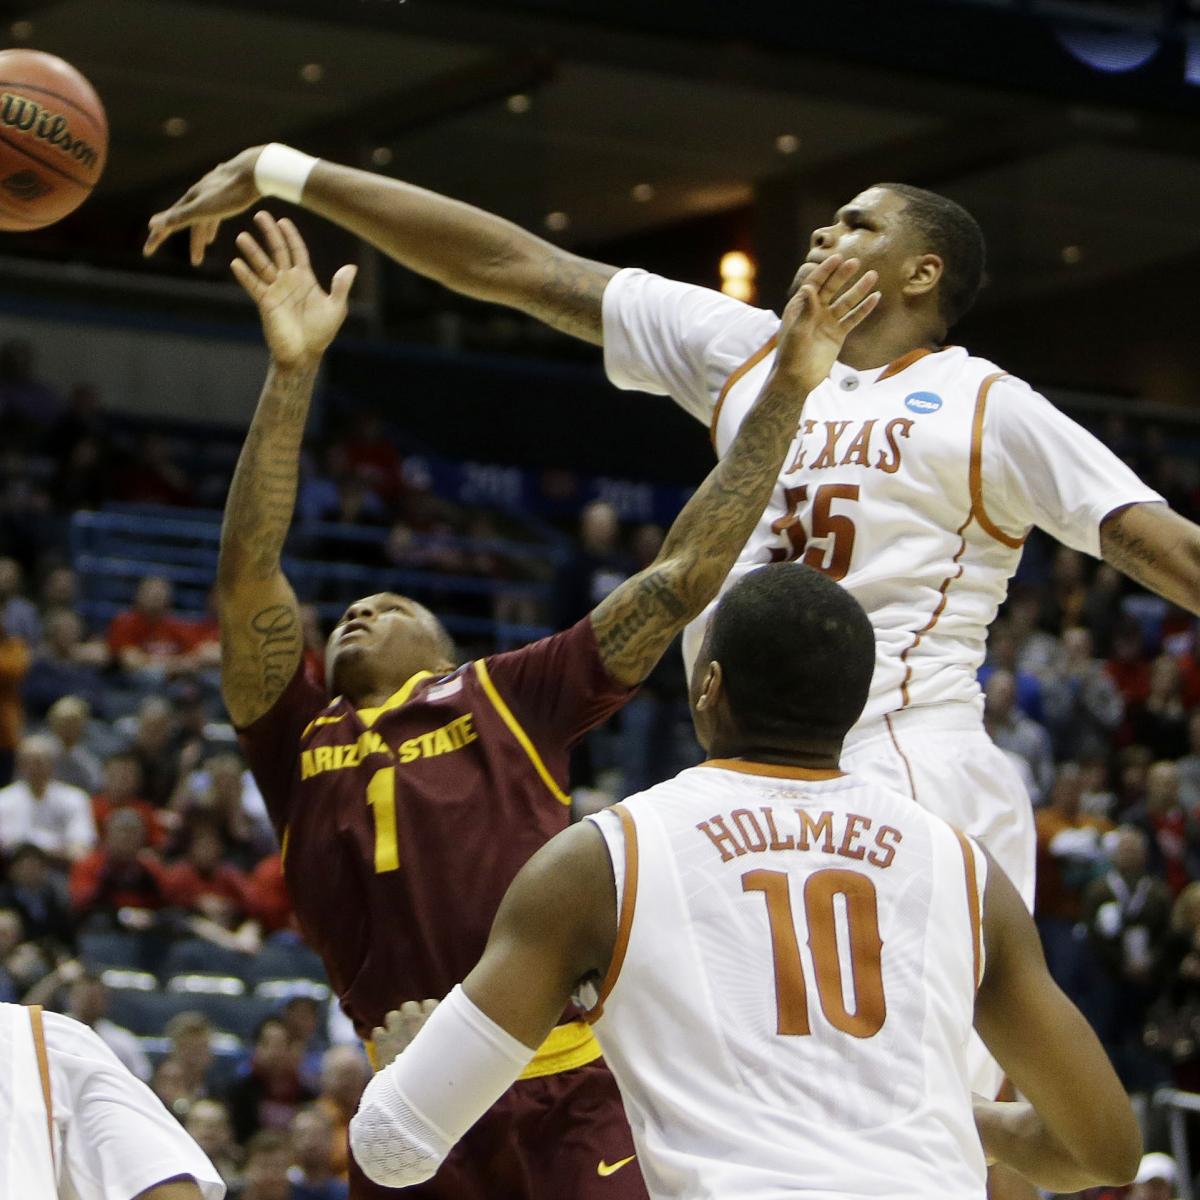 Texas vs. Arizona State Score, Twitter Reaction, More from March